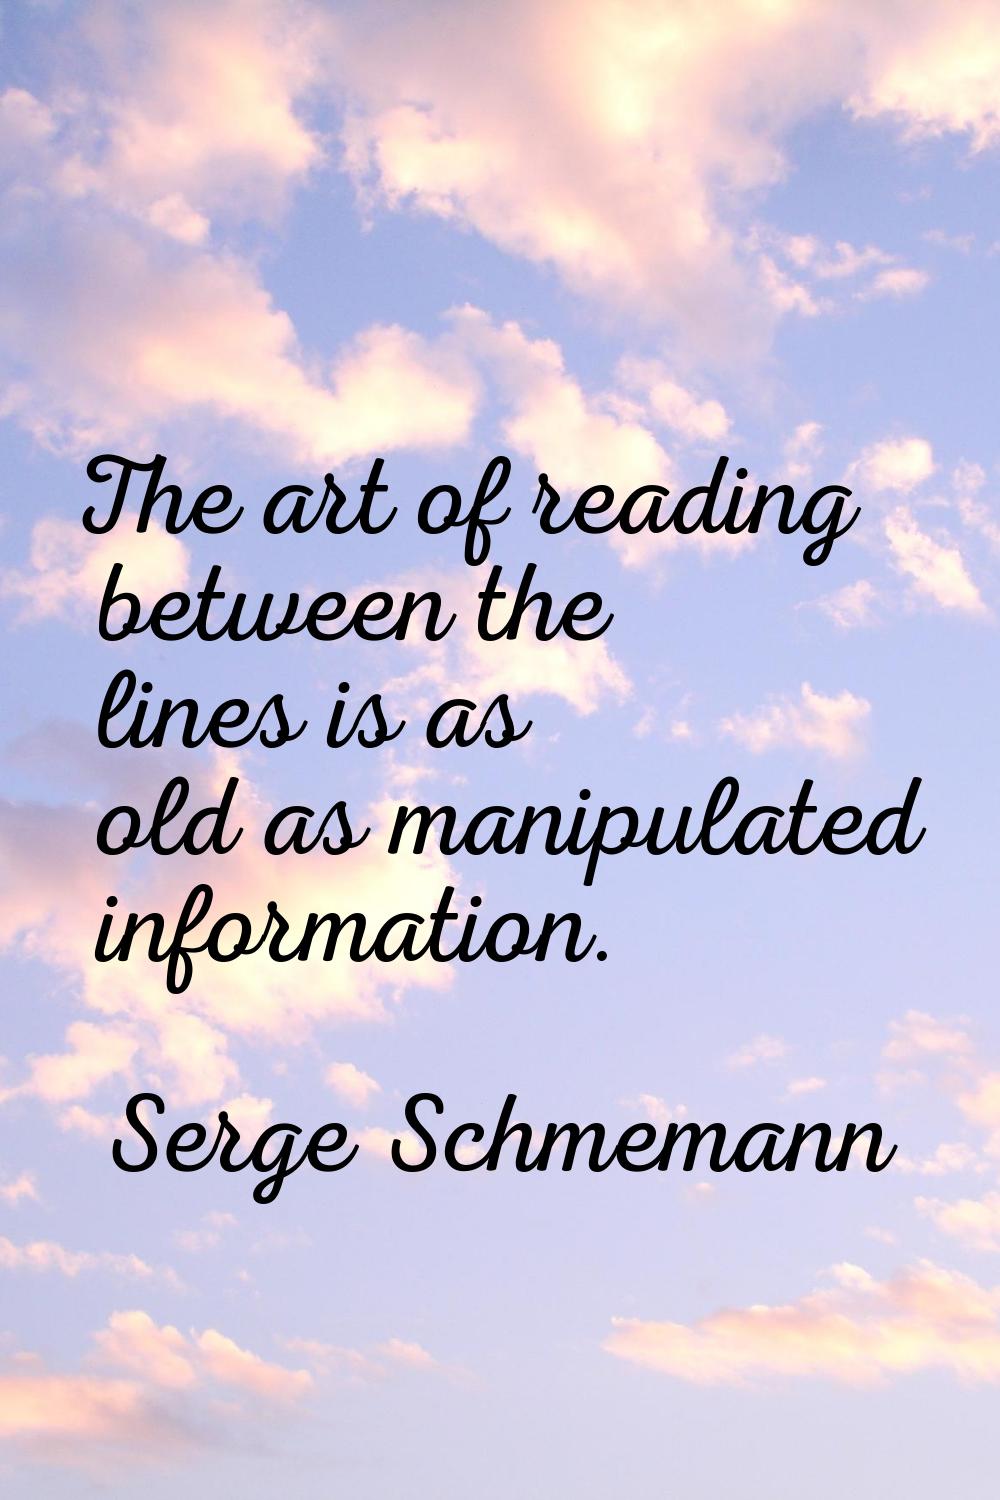 The art of reading between the lines is as old as manipulated information.